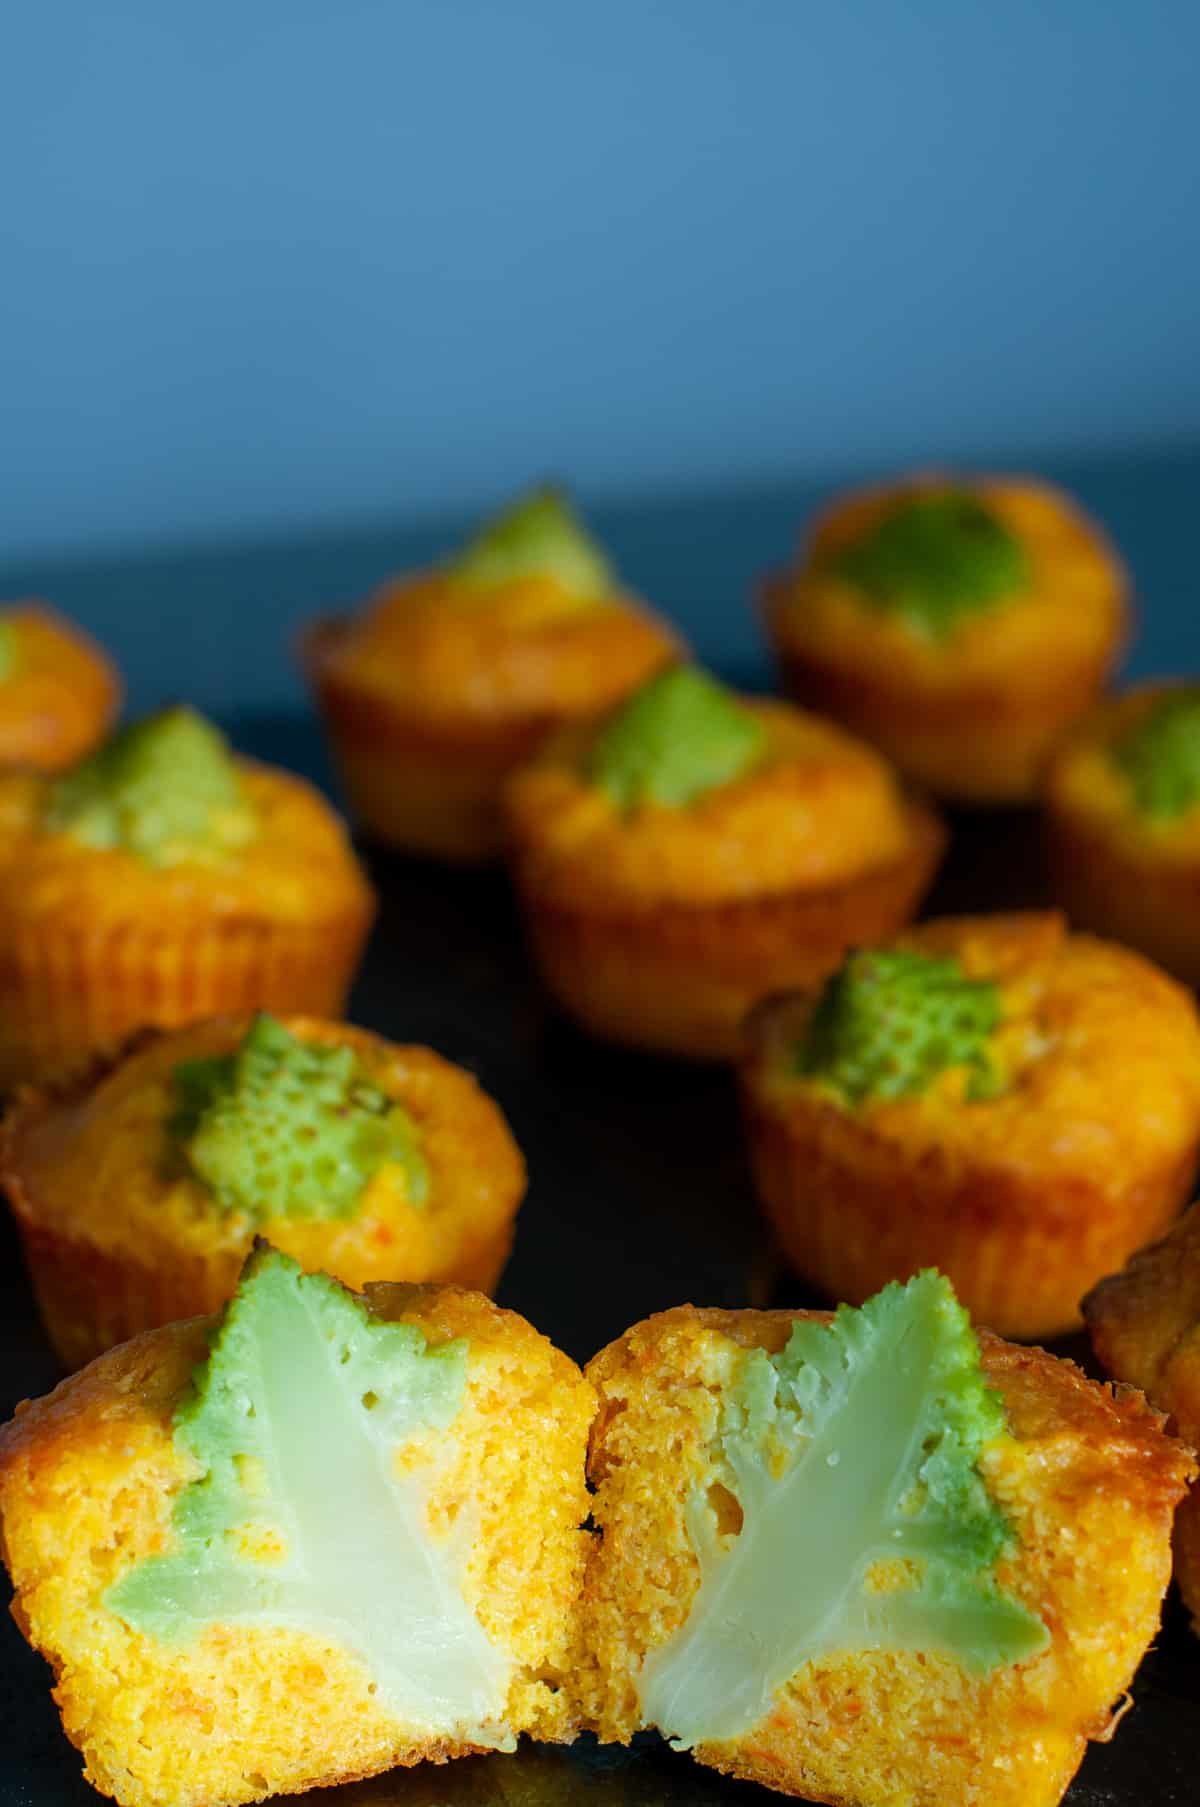 Romanesco broccoli recipe savory cupcakes cut in half to see the middle